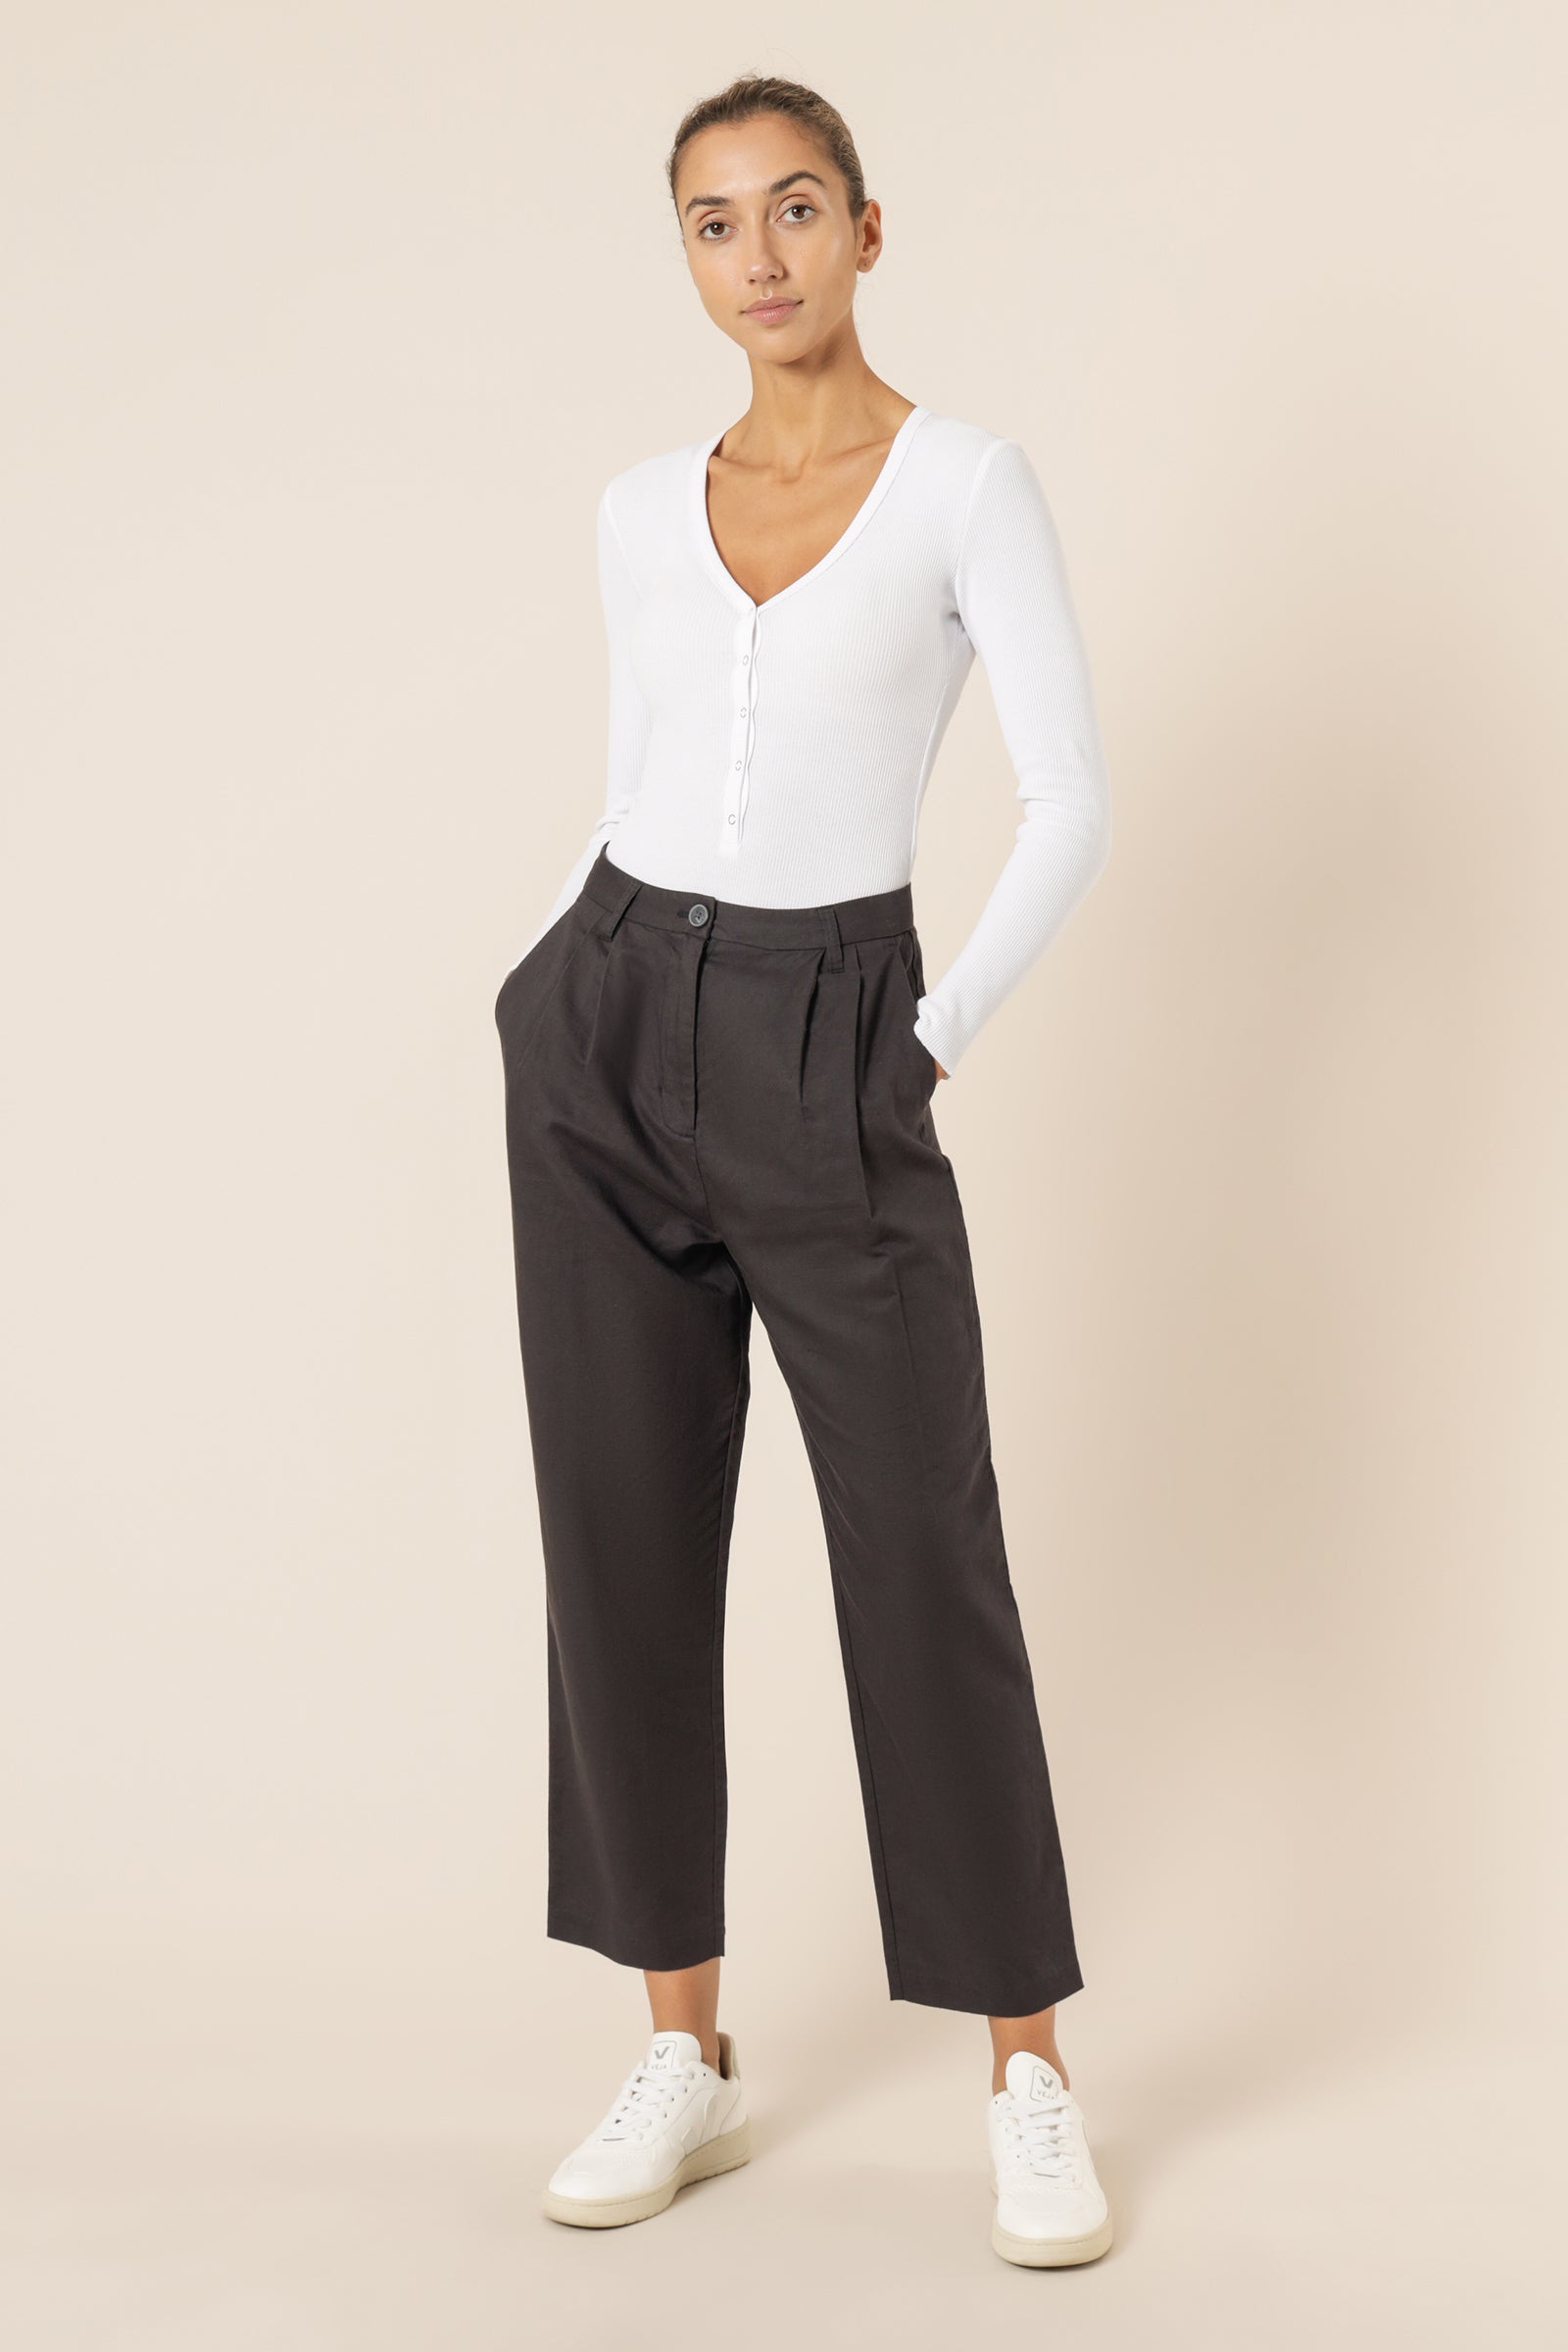 Nude Lucy elina tailored pant coal pants